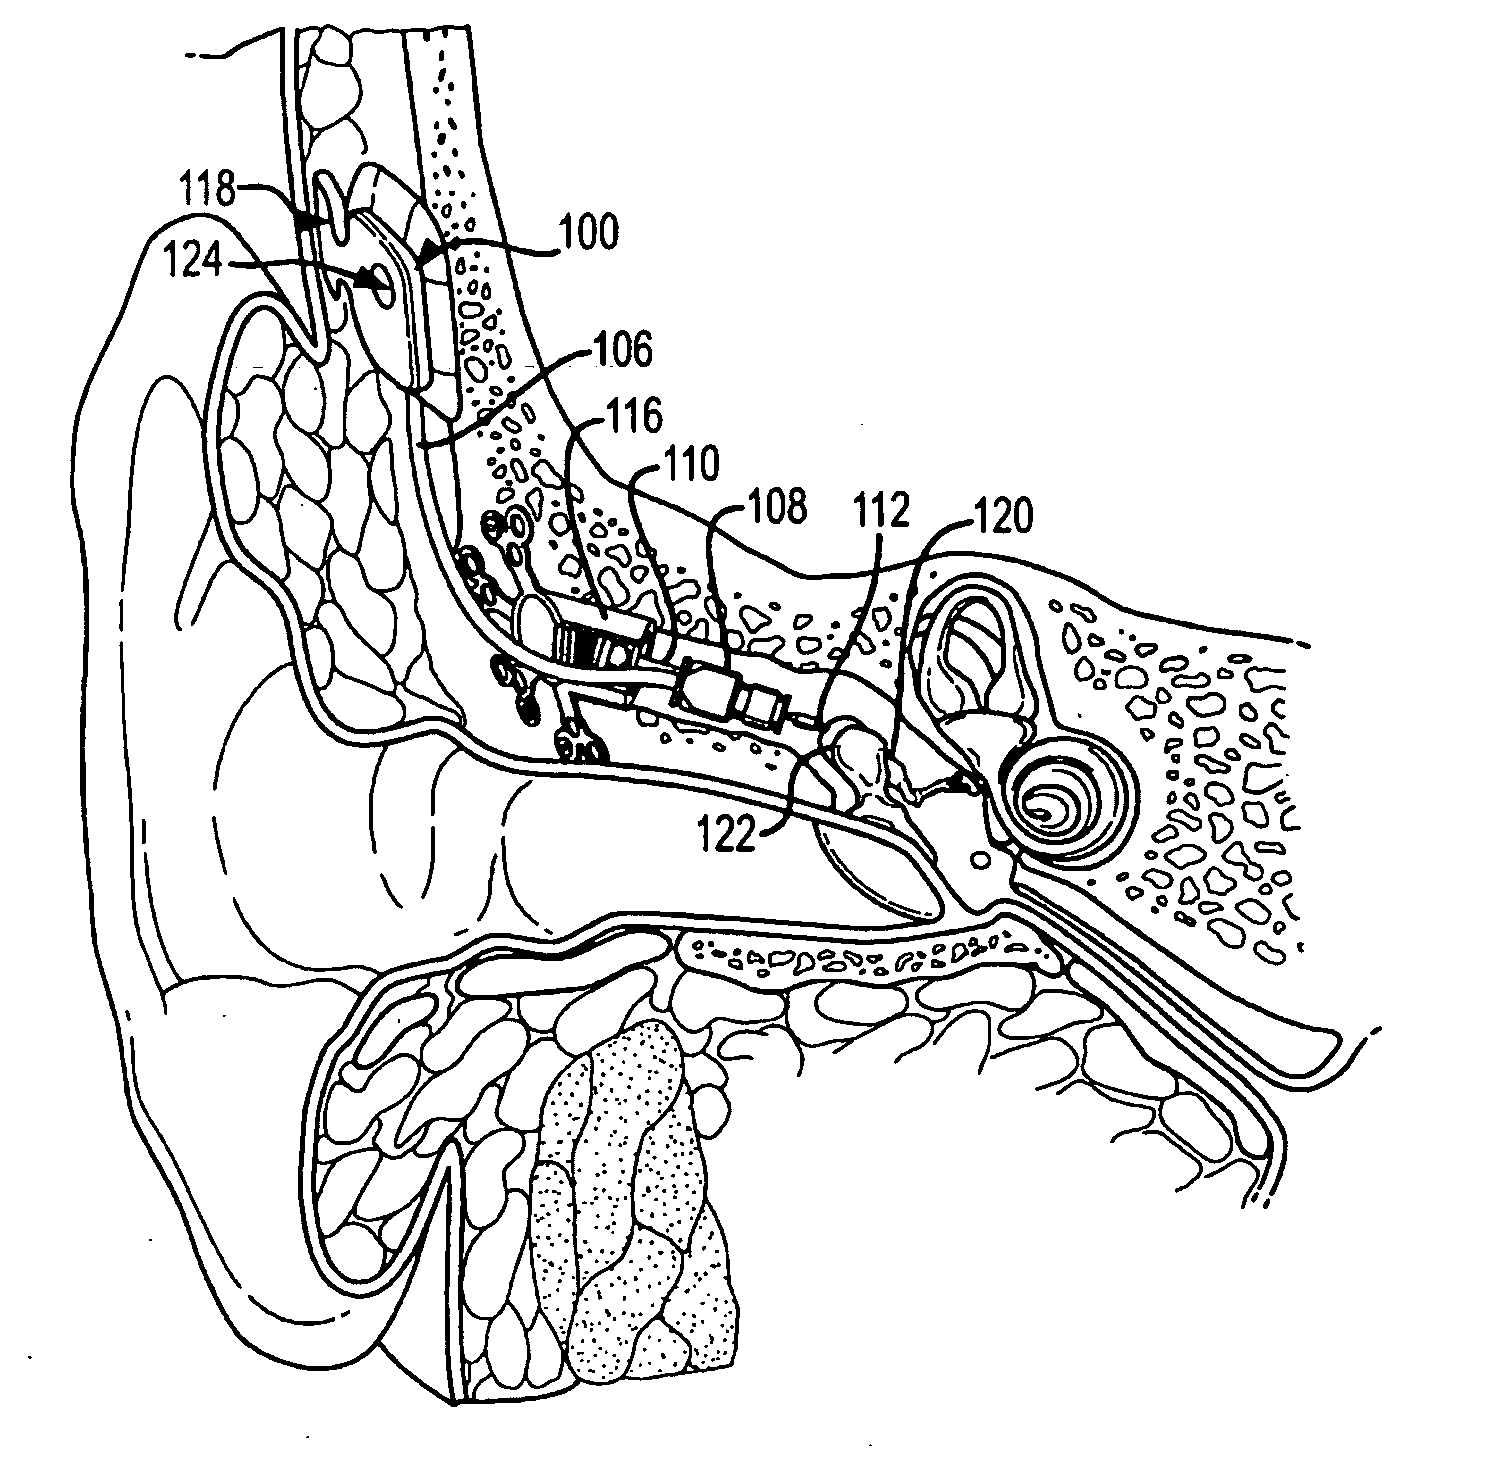 Fluid cushion support for implantable device